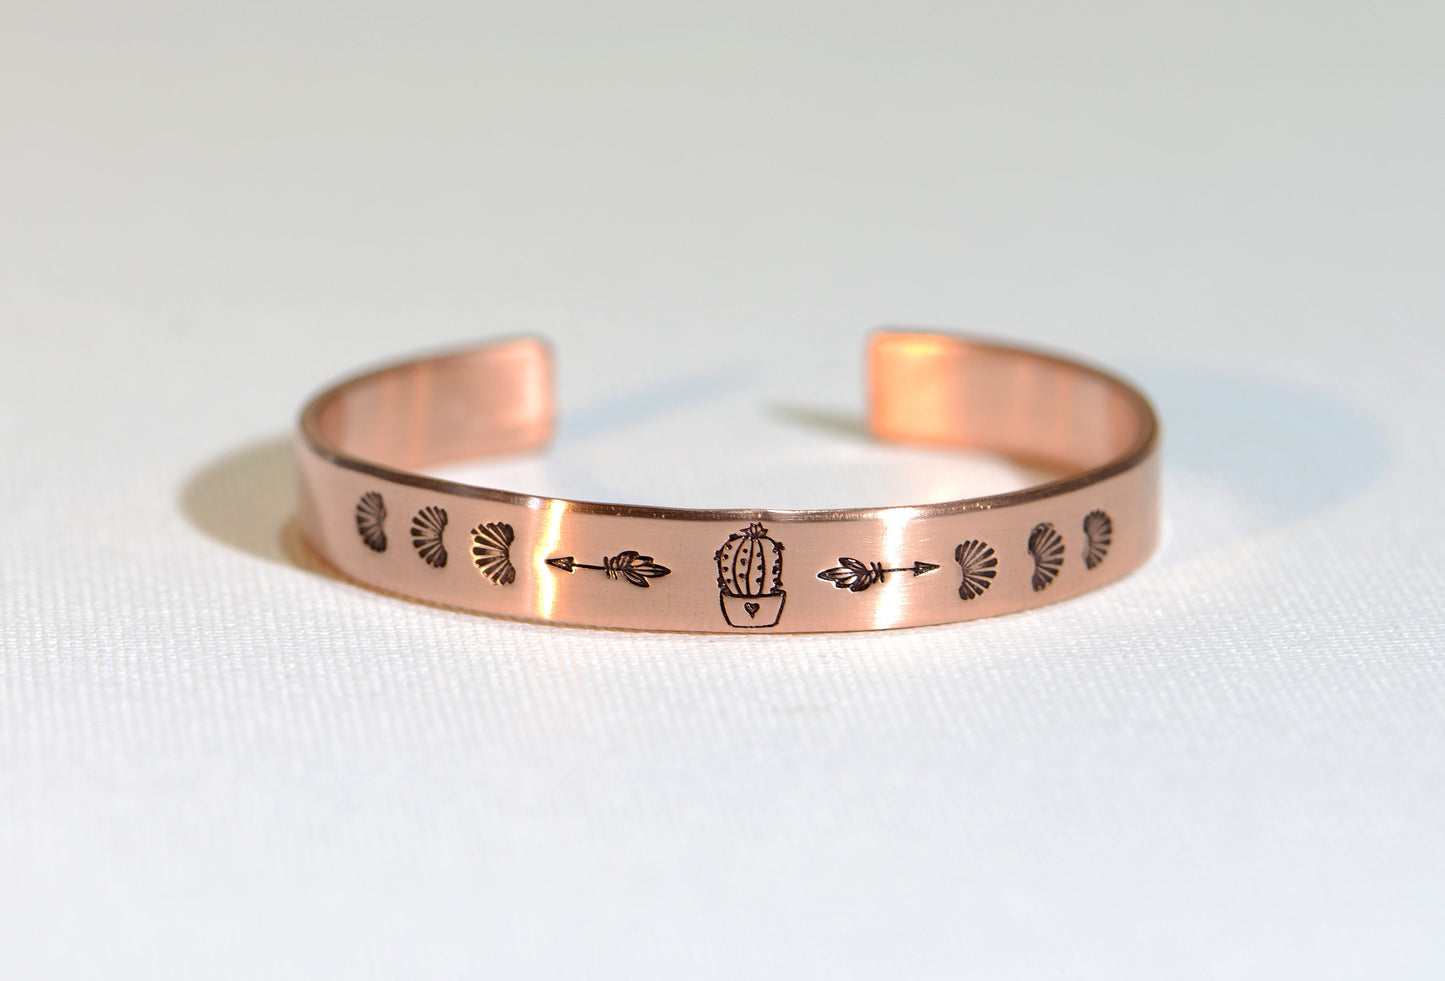 Guitar pick copper bracelet with cactus in a pot along with arrows